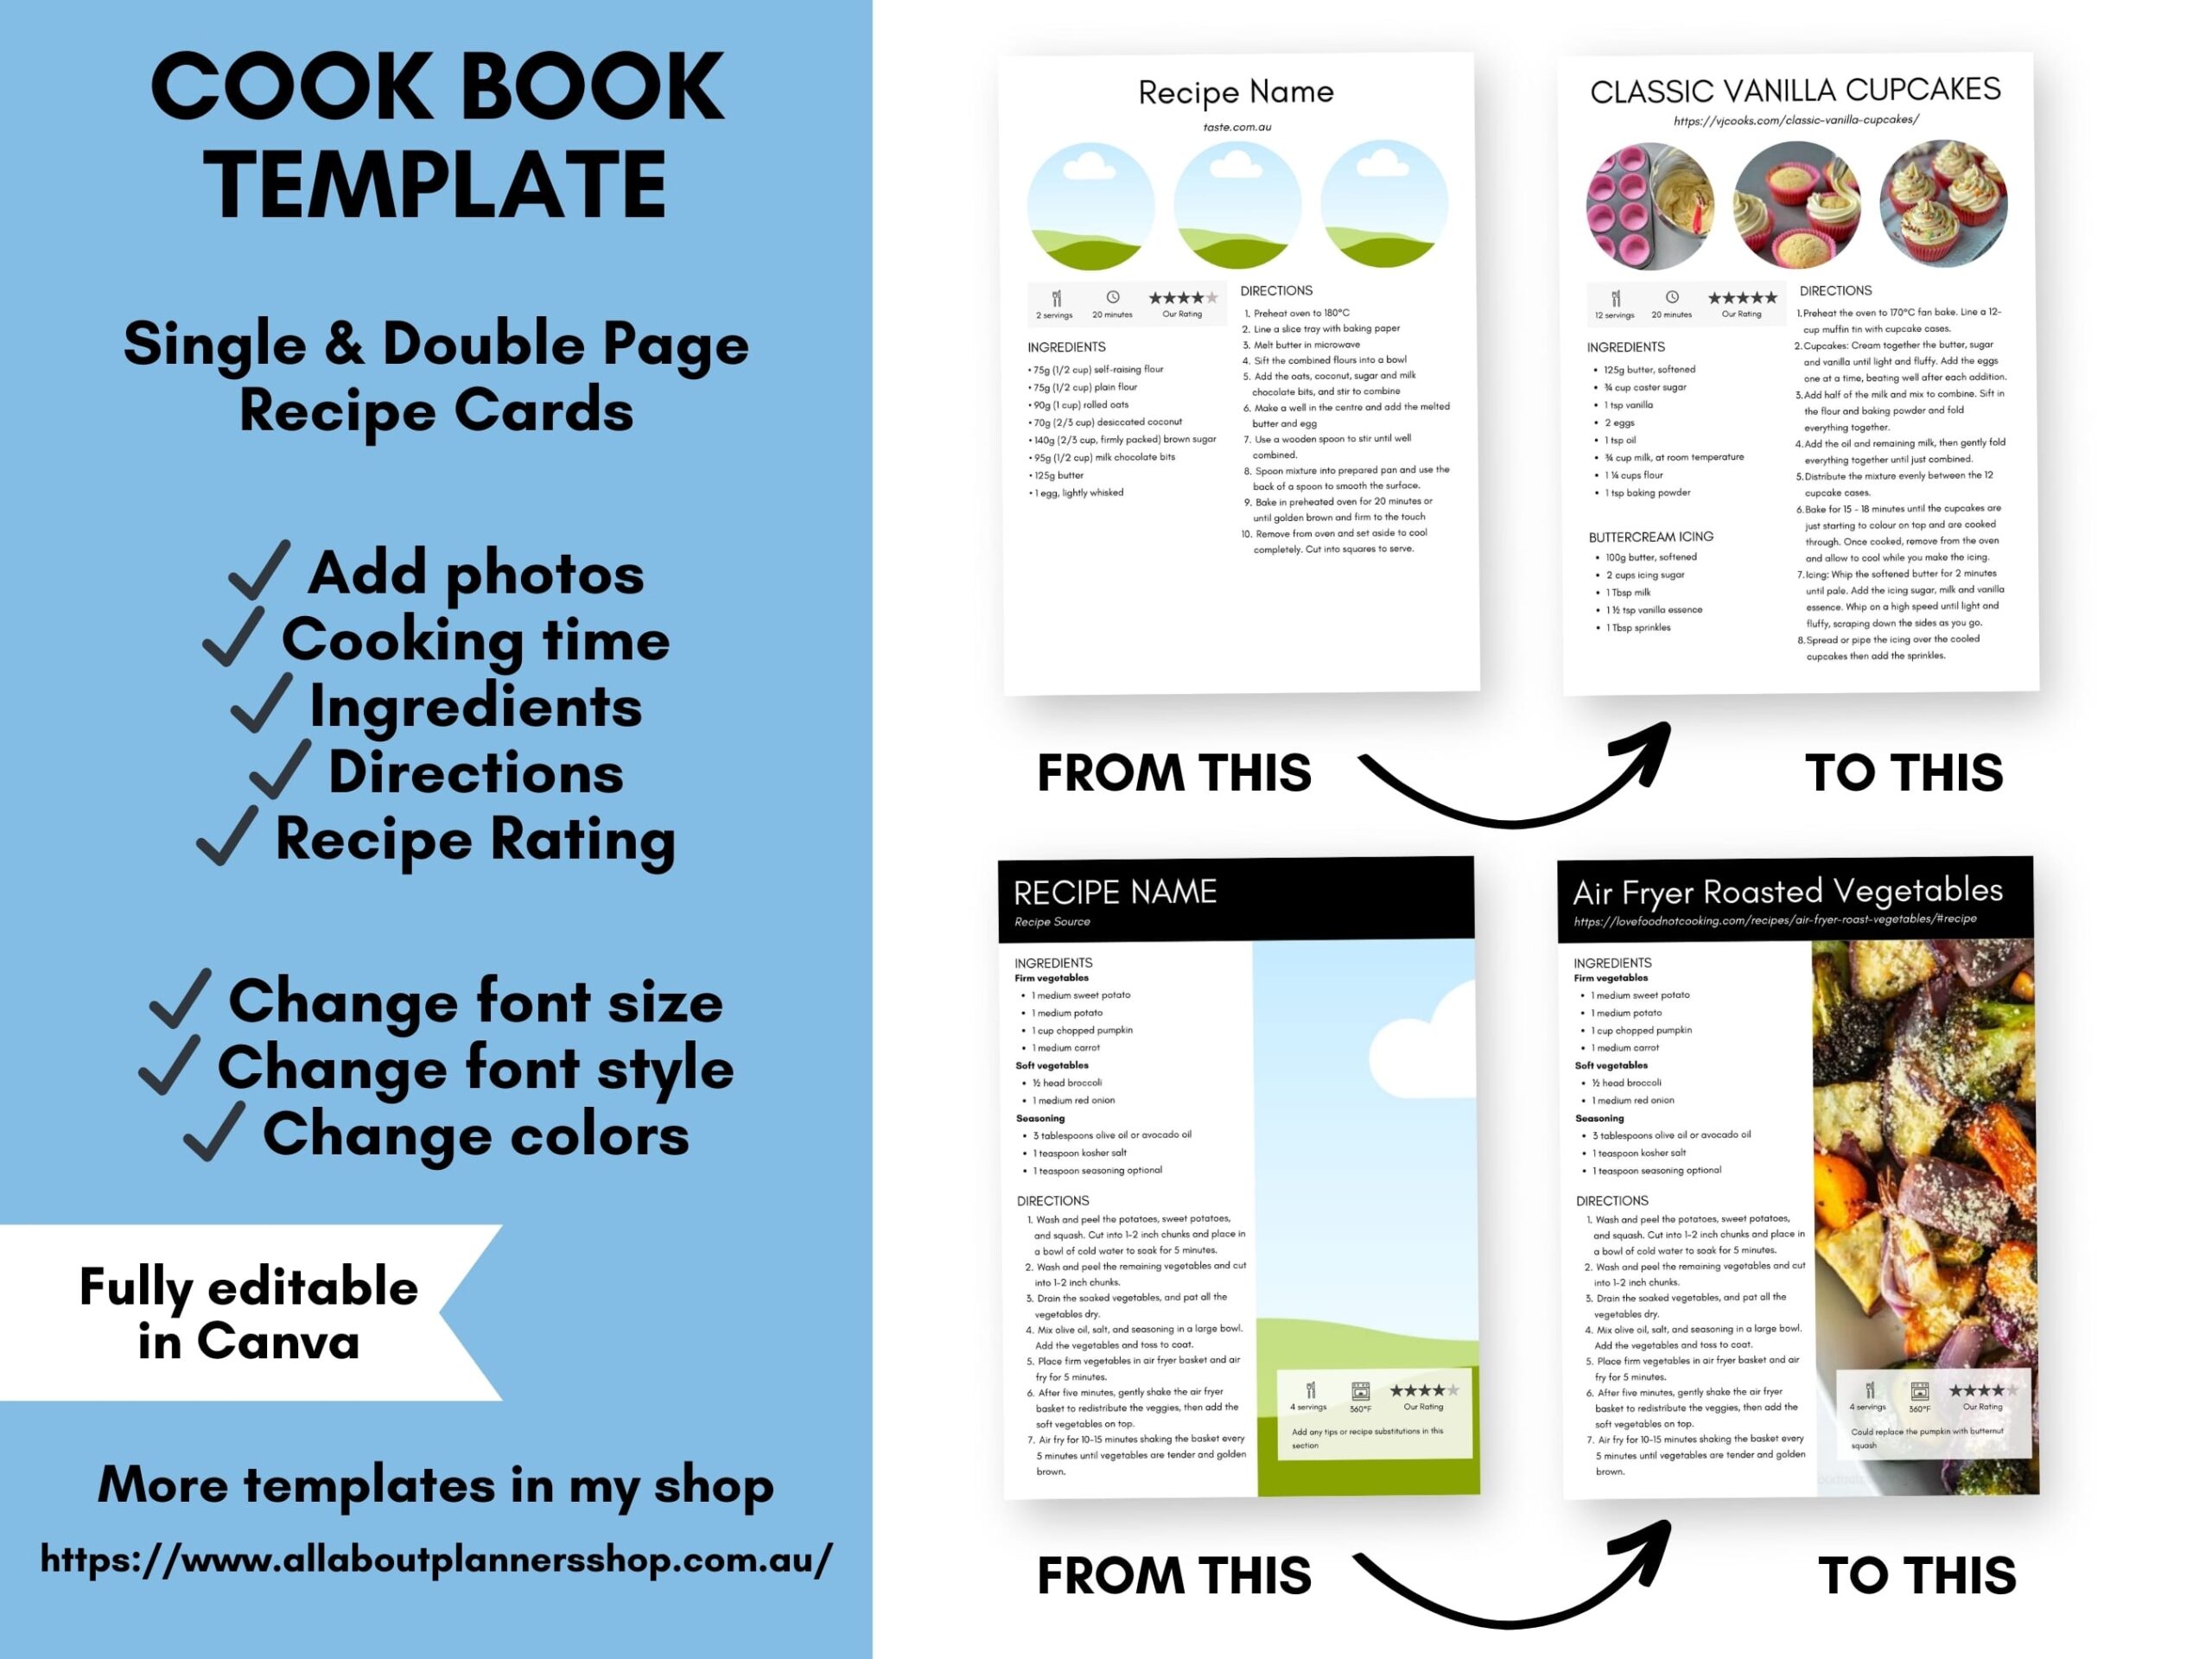 editable recipe card template canva cook book easily edit in the free version of canva change colors font style add recipe photos-min